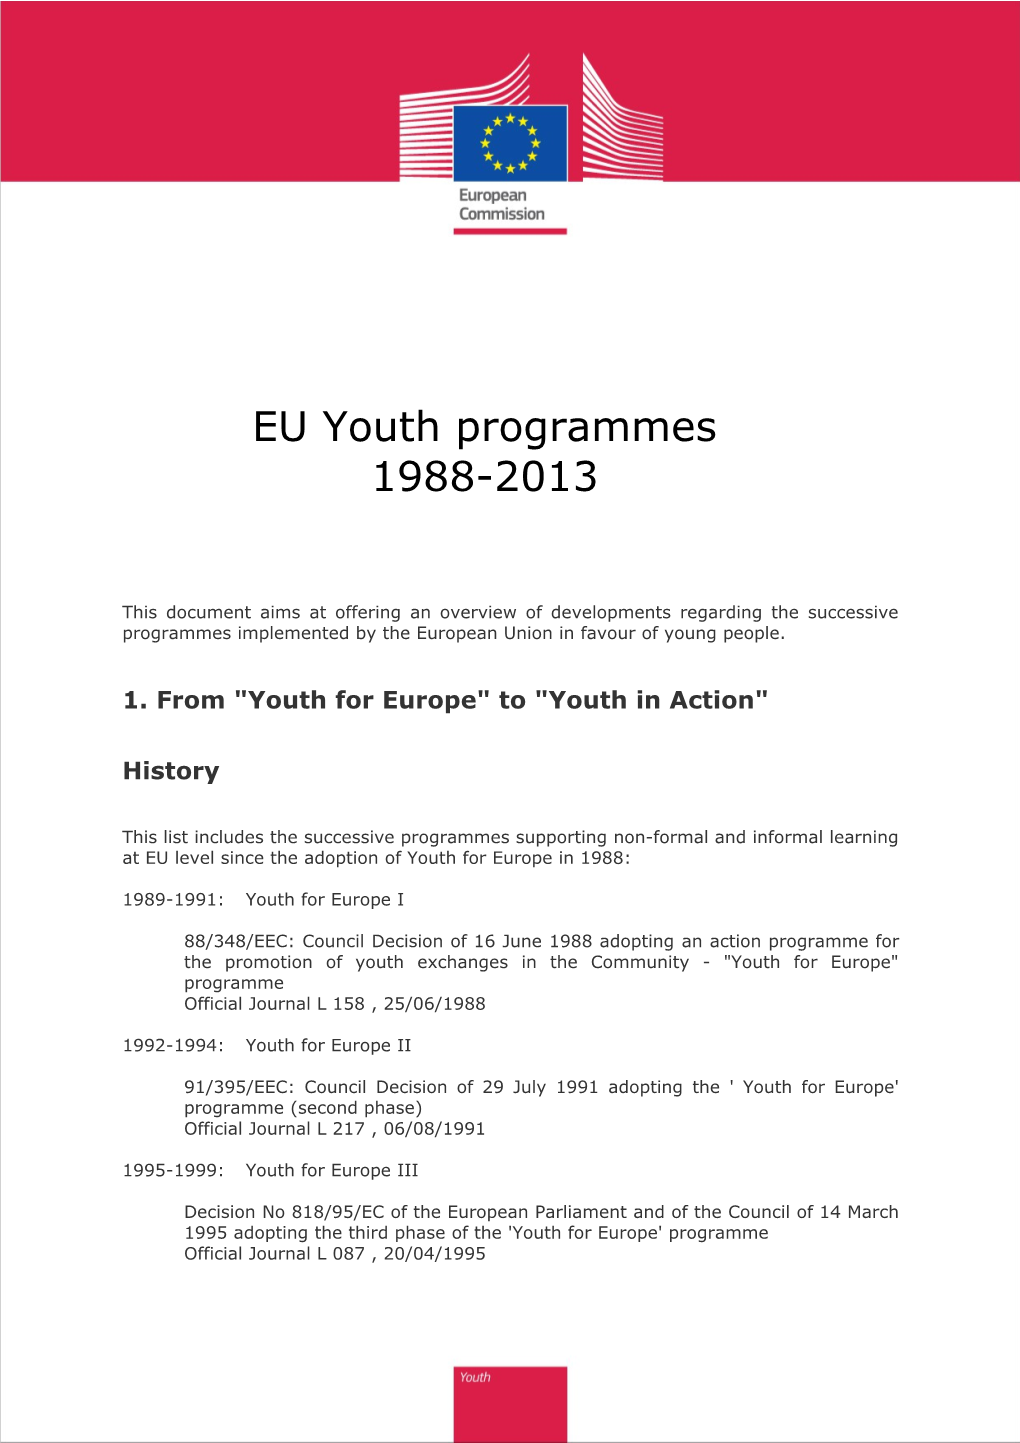 1.From Youth for Europe to Youth in Action